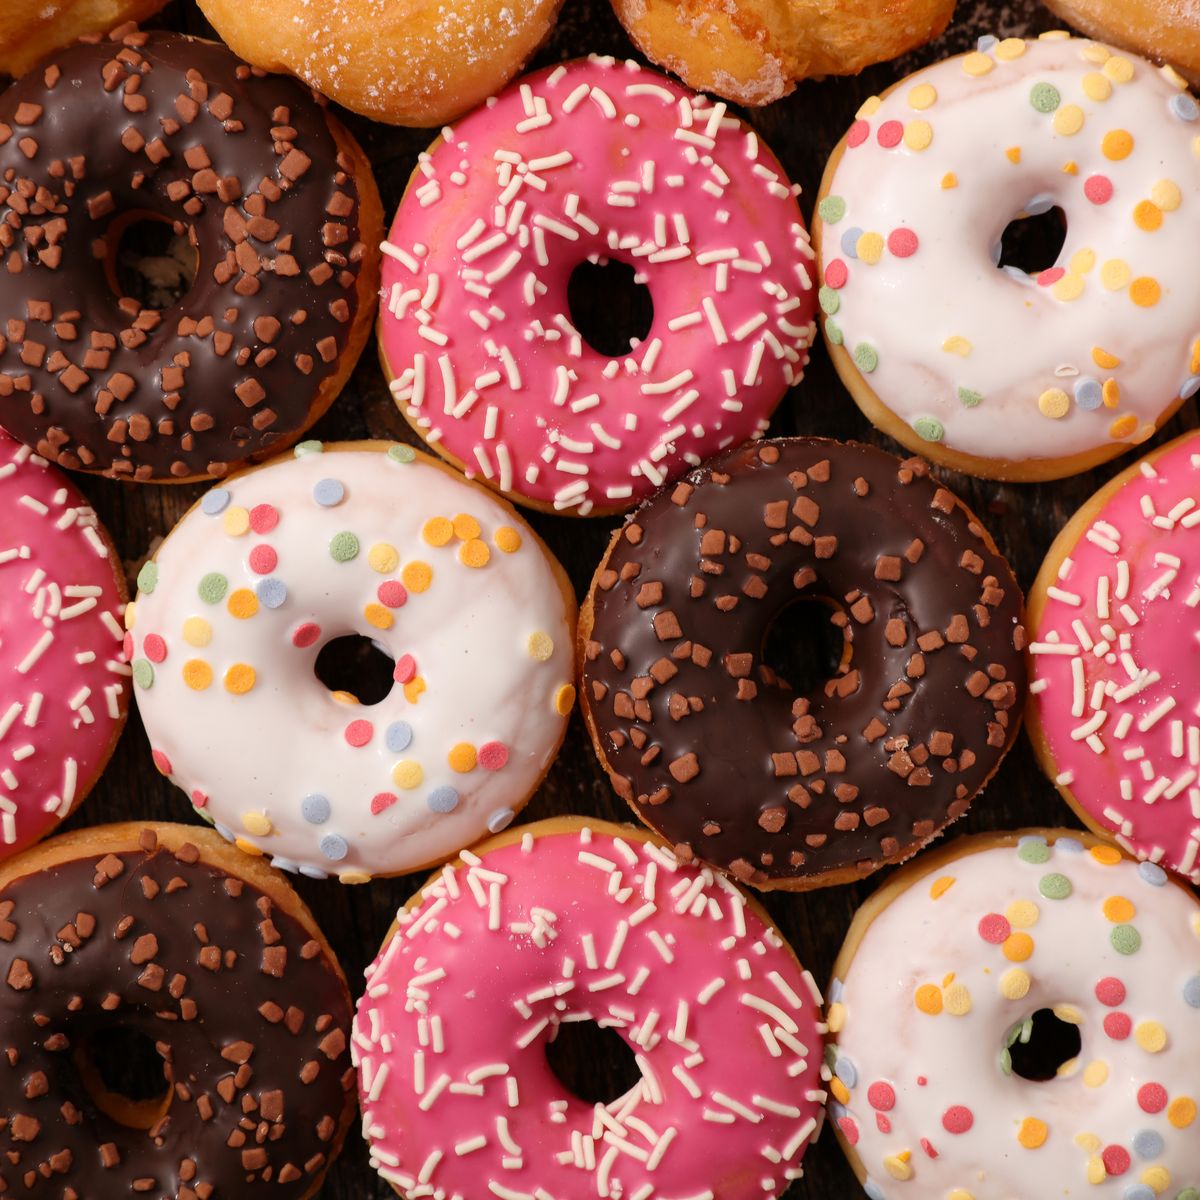 8 Reasons Why You Should Never, Ever Eat Donuts